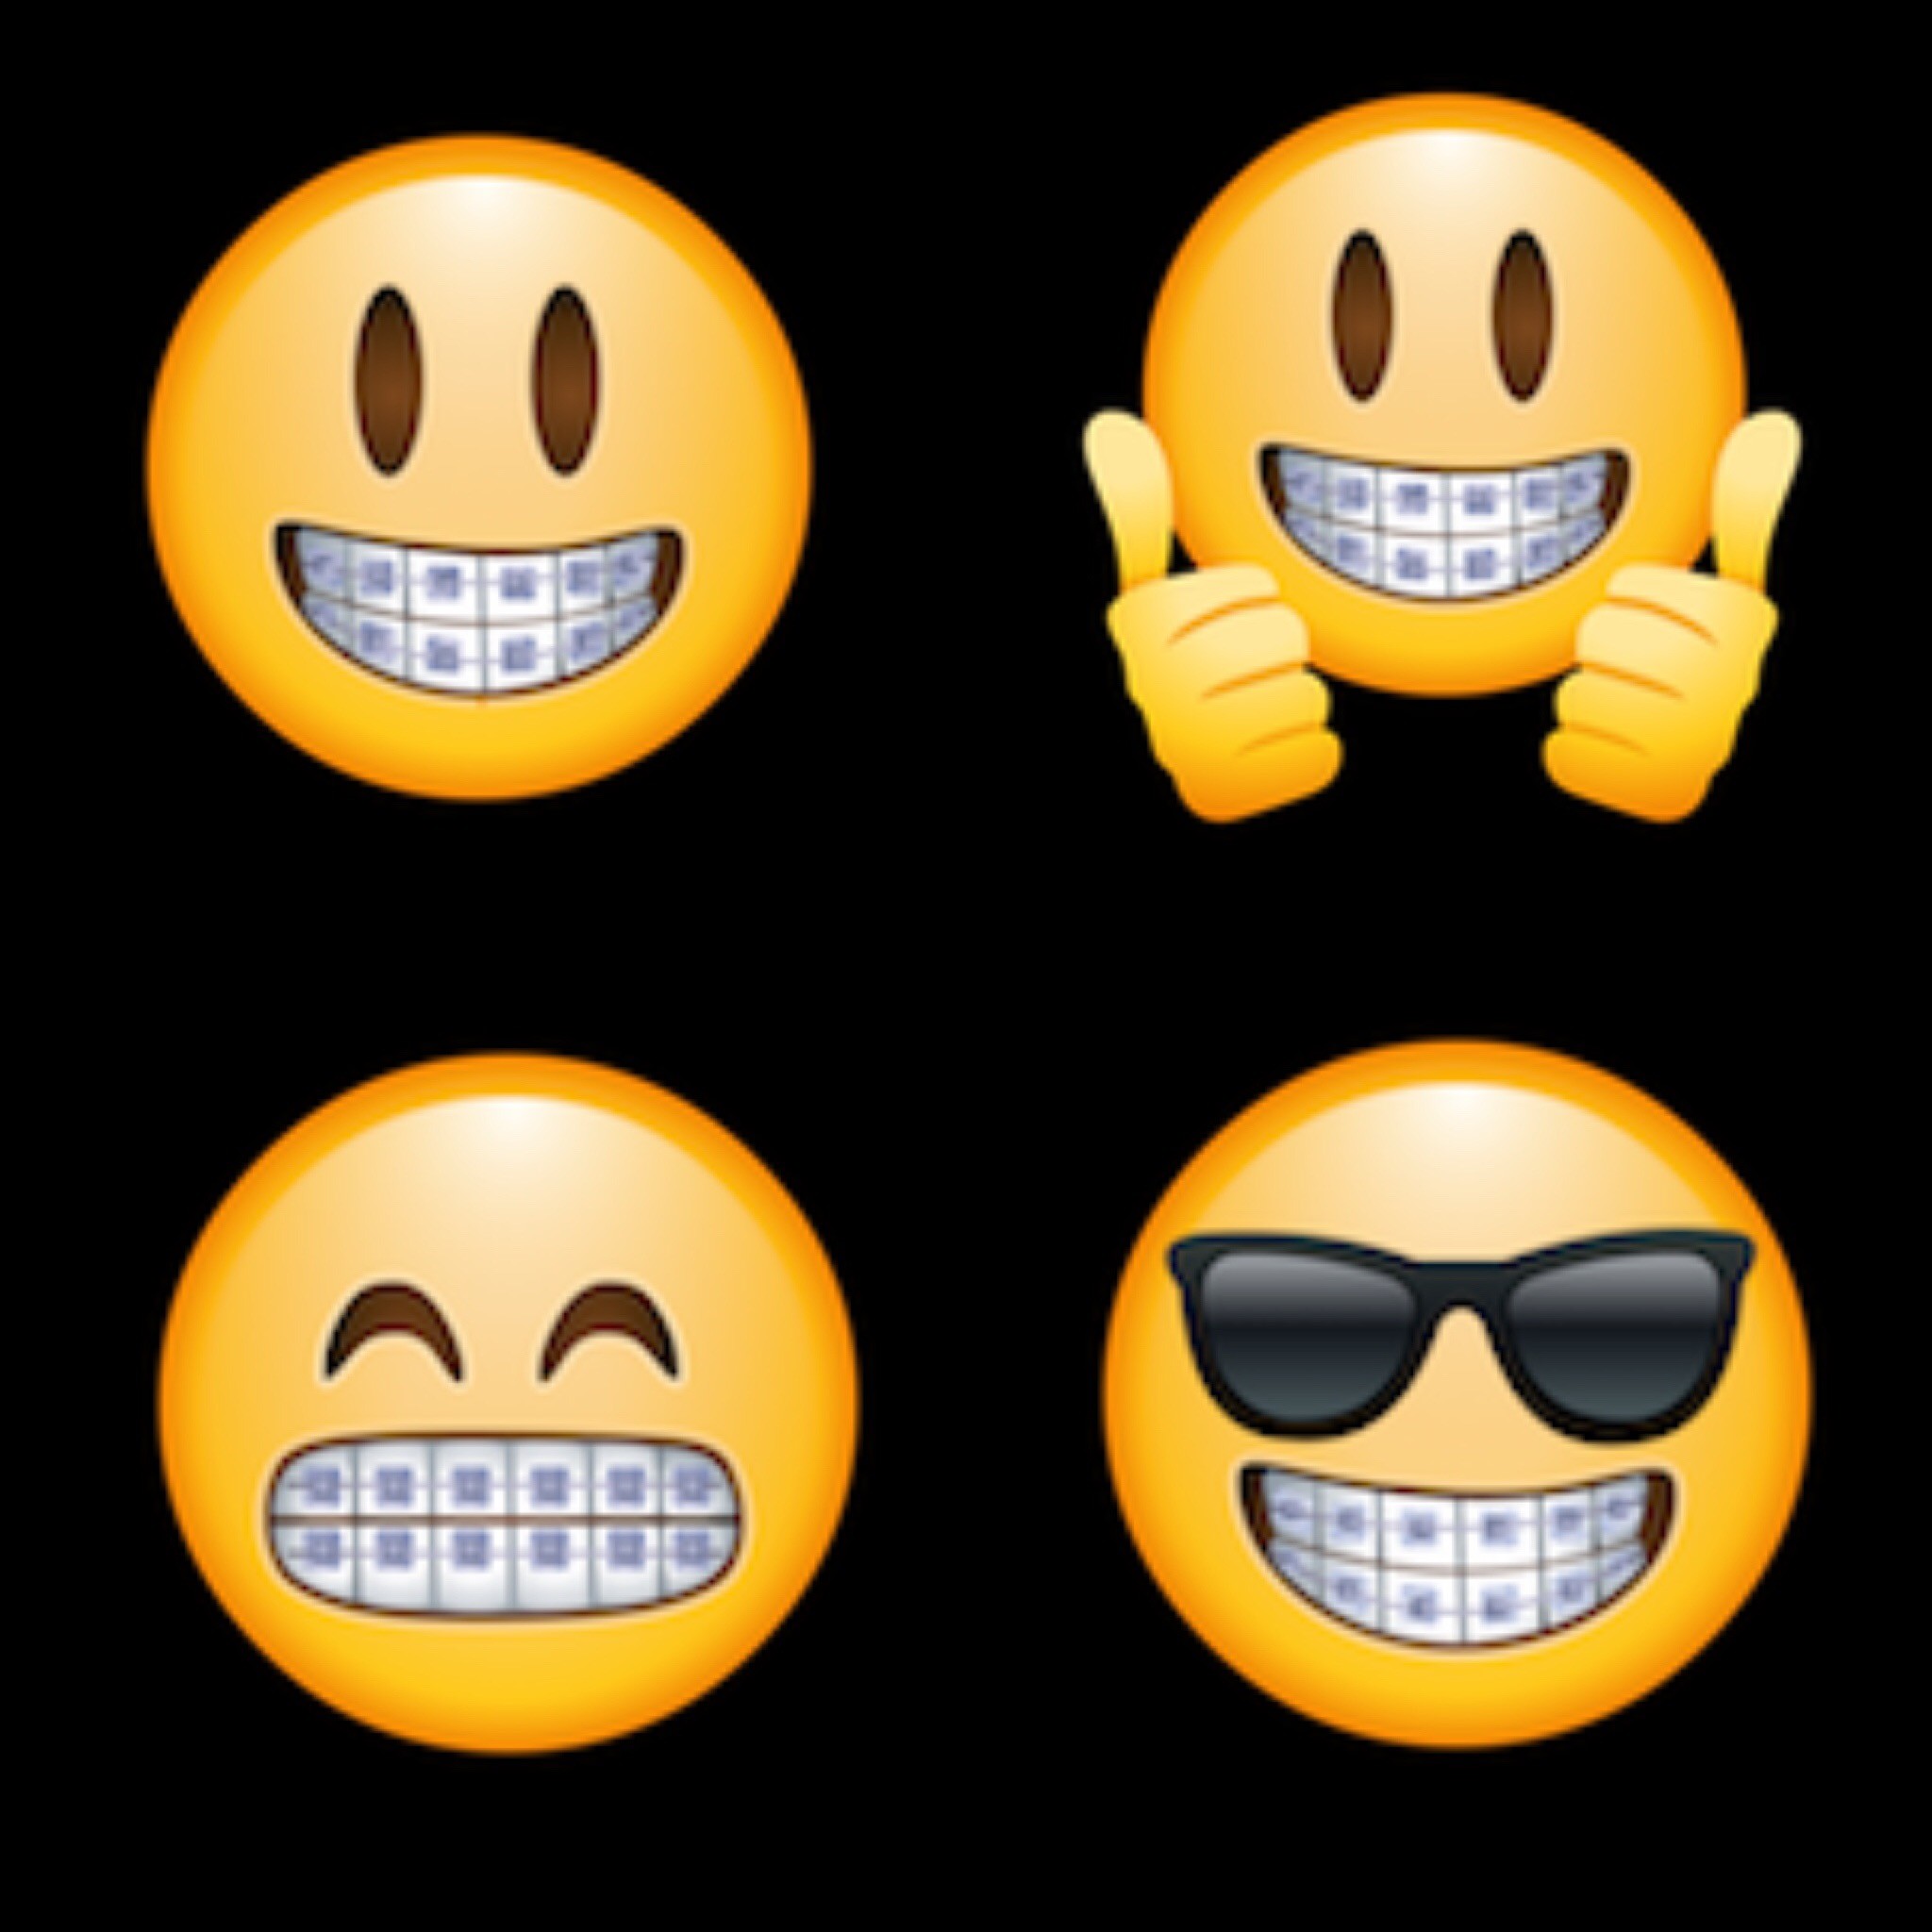 2048x2048 Share the power of self-confidence with the Bethany Hamilton Damonâ¢ Smile  Emoji keyboard by messaging and texting Bethany Hamilton and Damon Smile  inspired ...